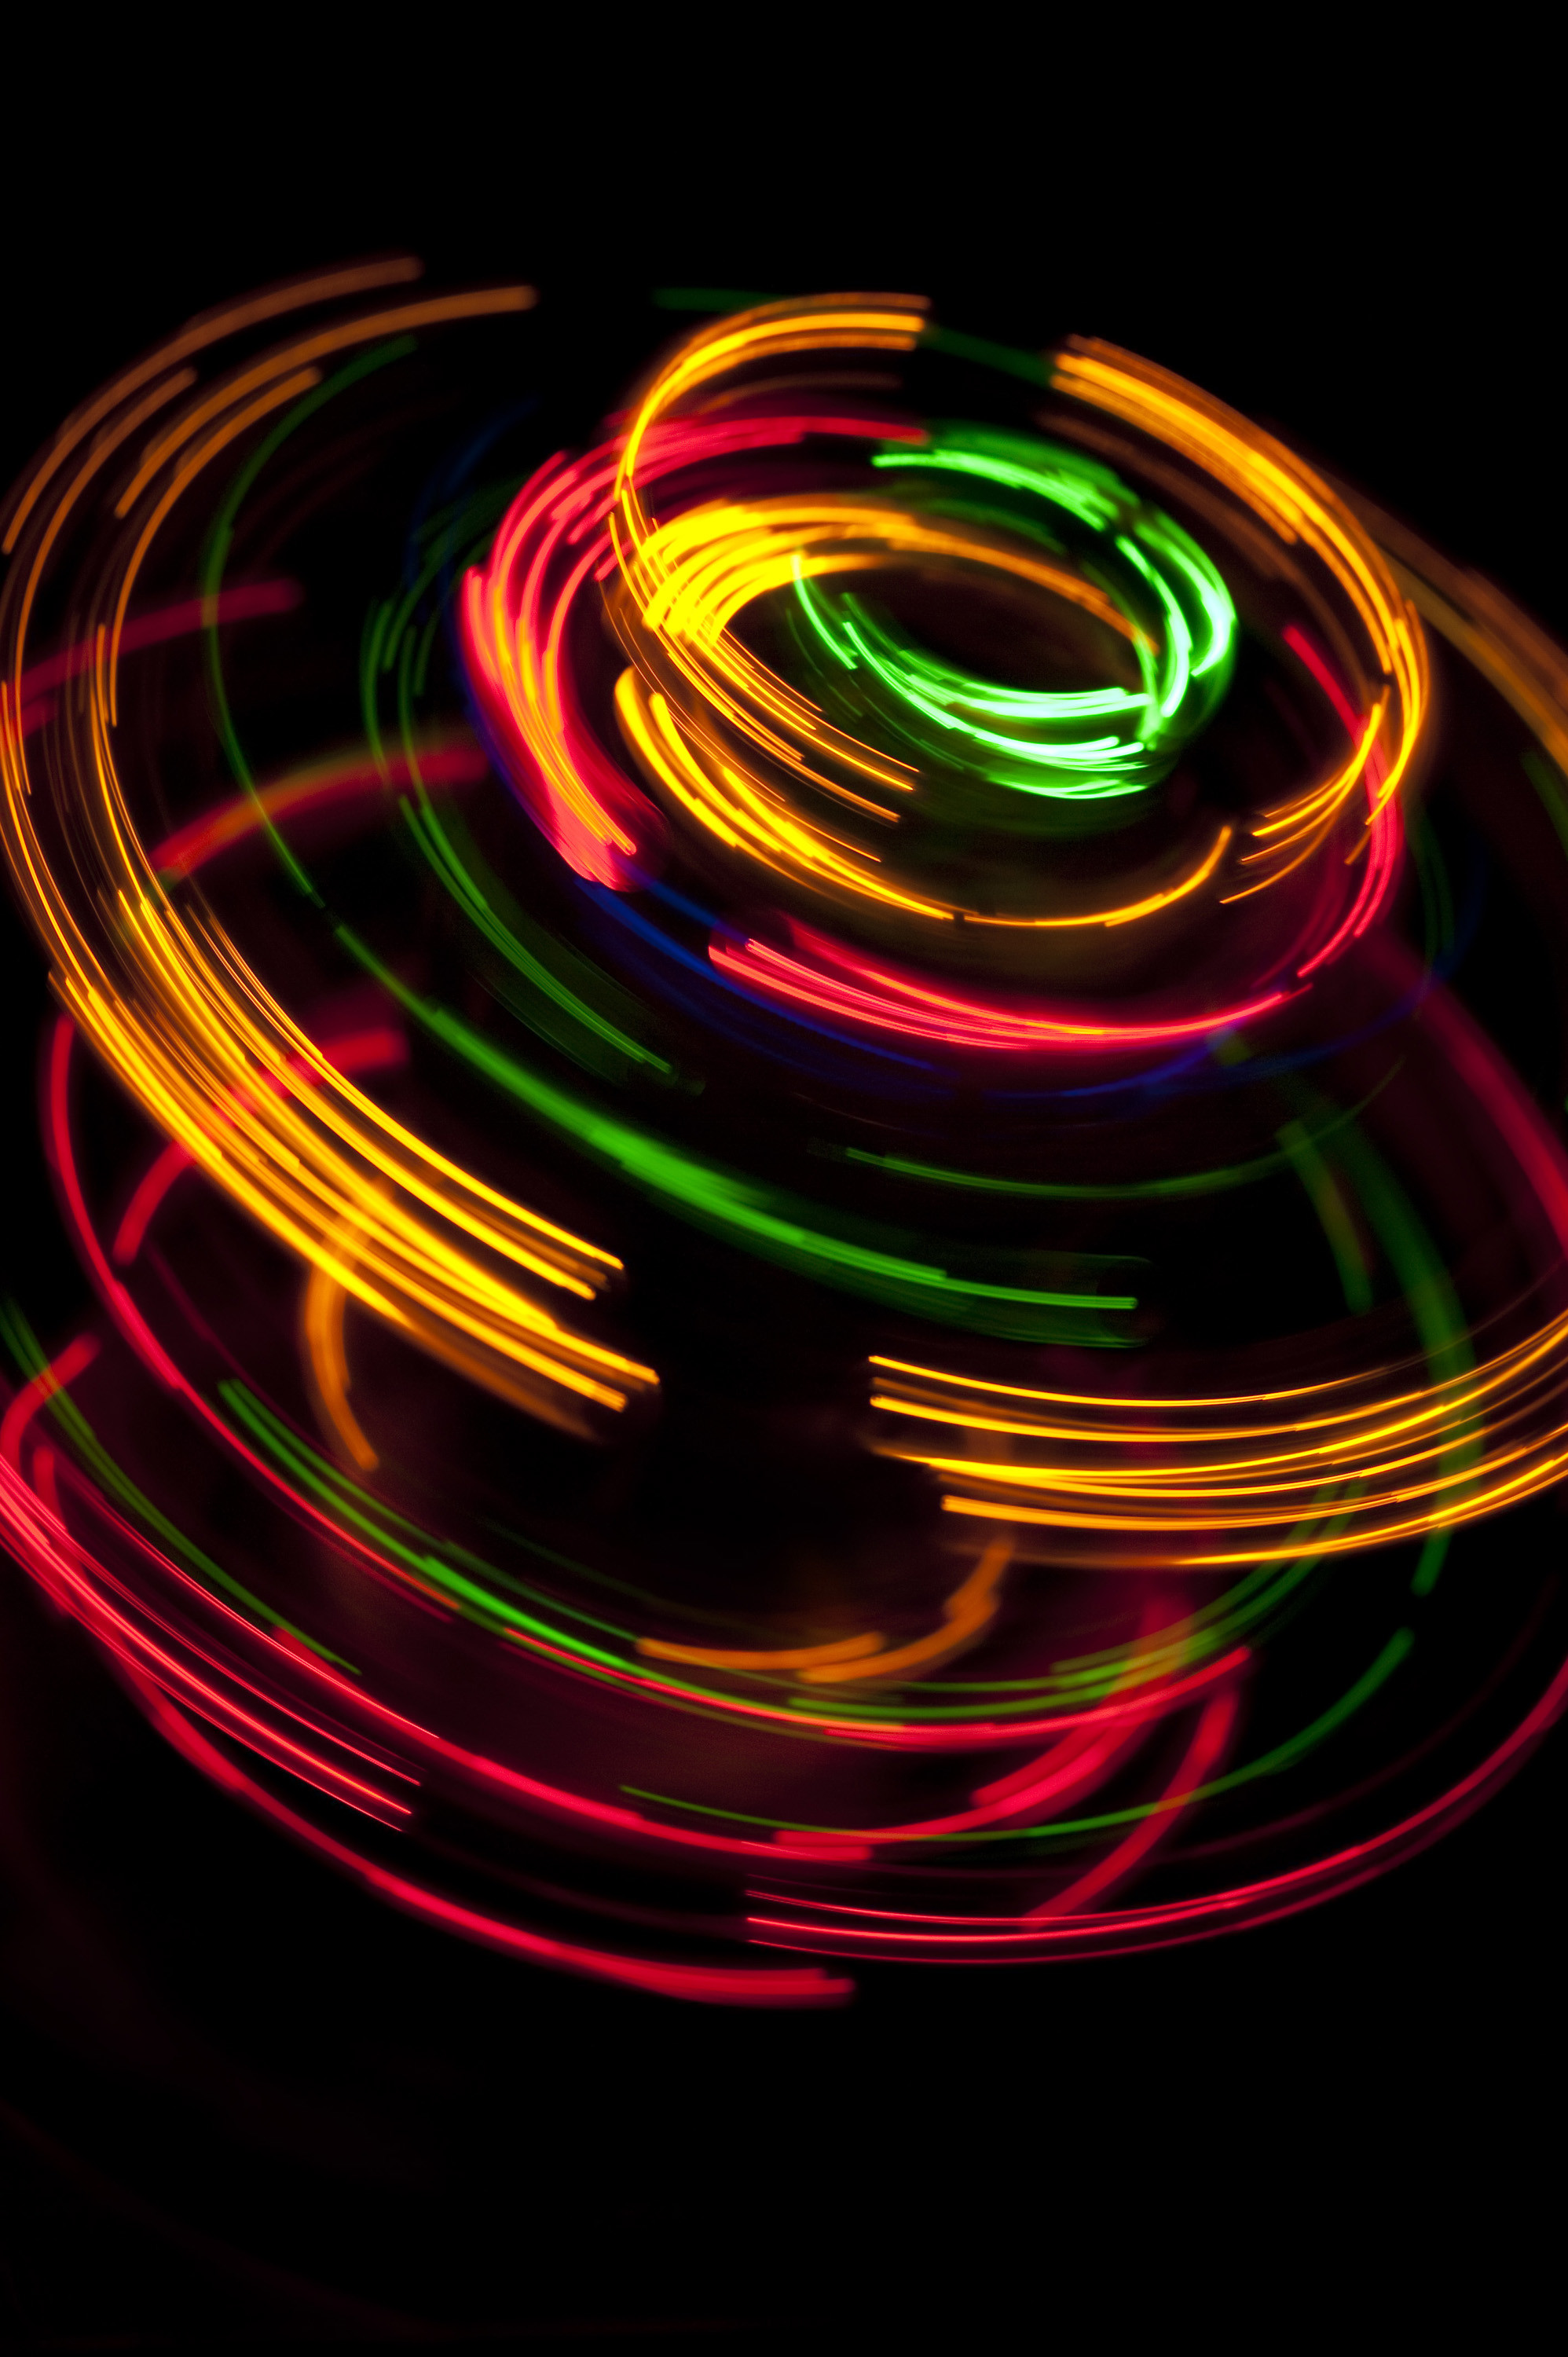 1996x3000 colorful series of overlapping curved lines of light glowing against a black  background